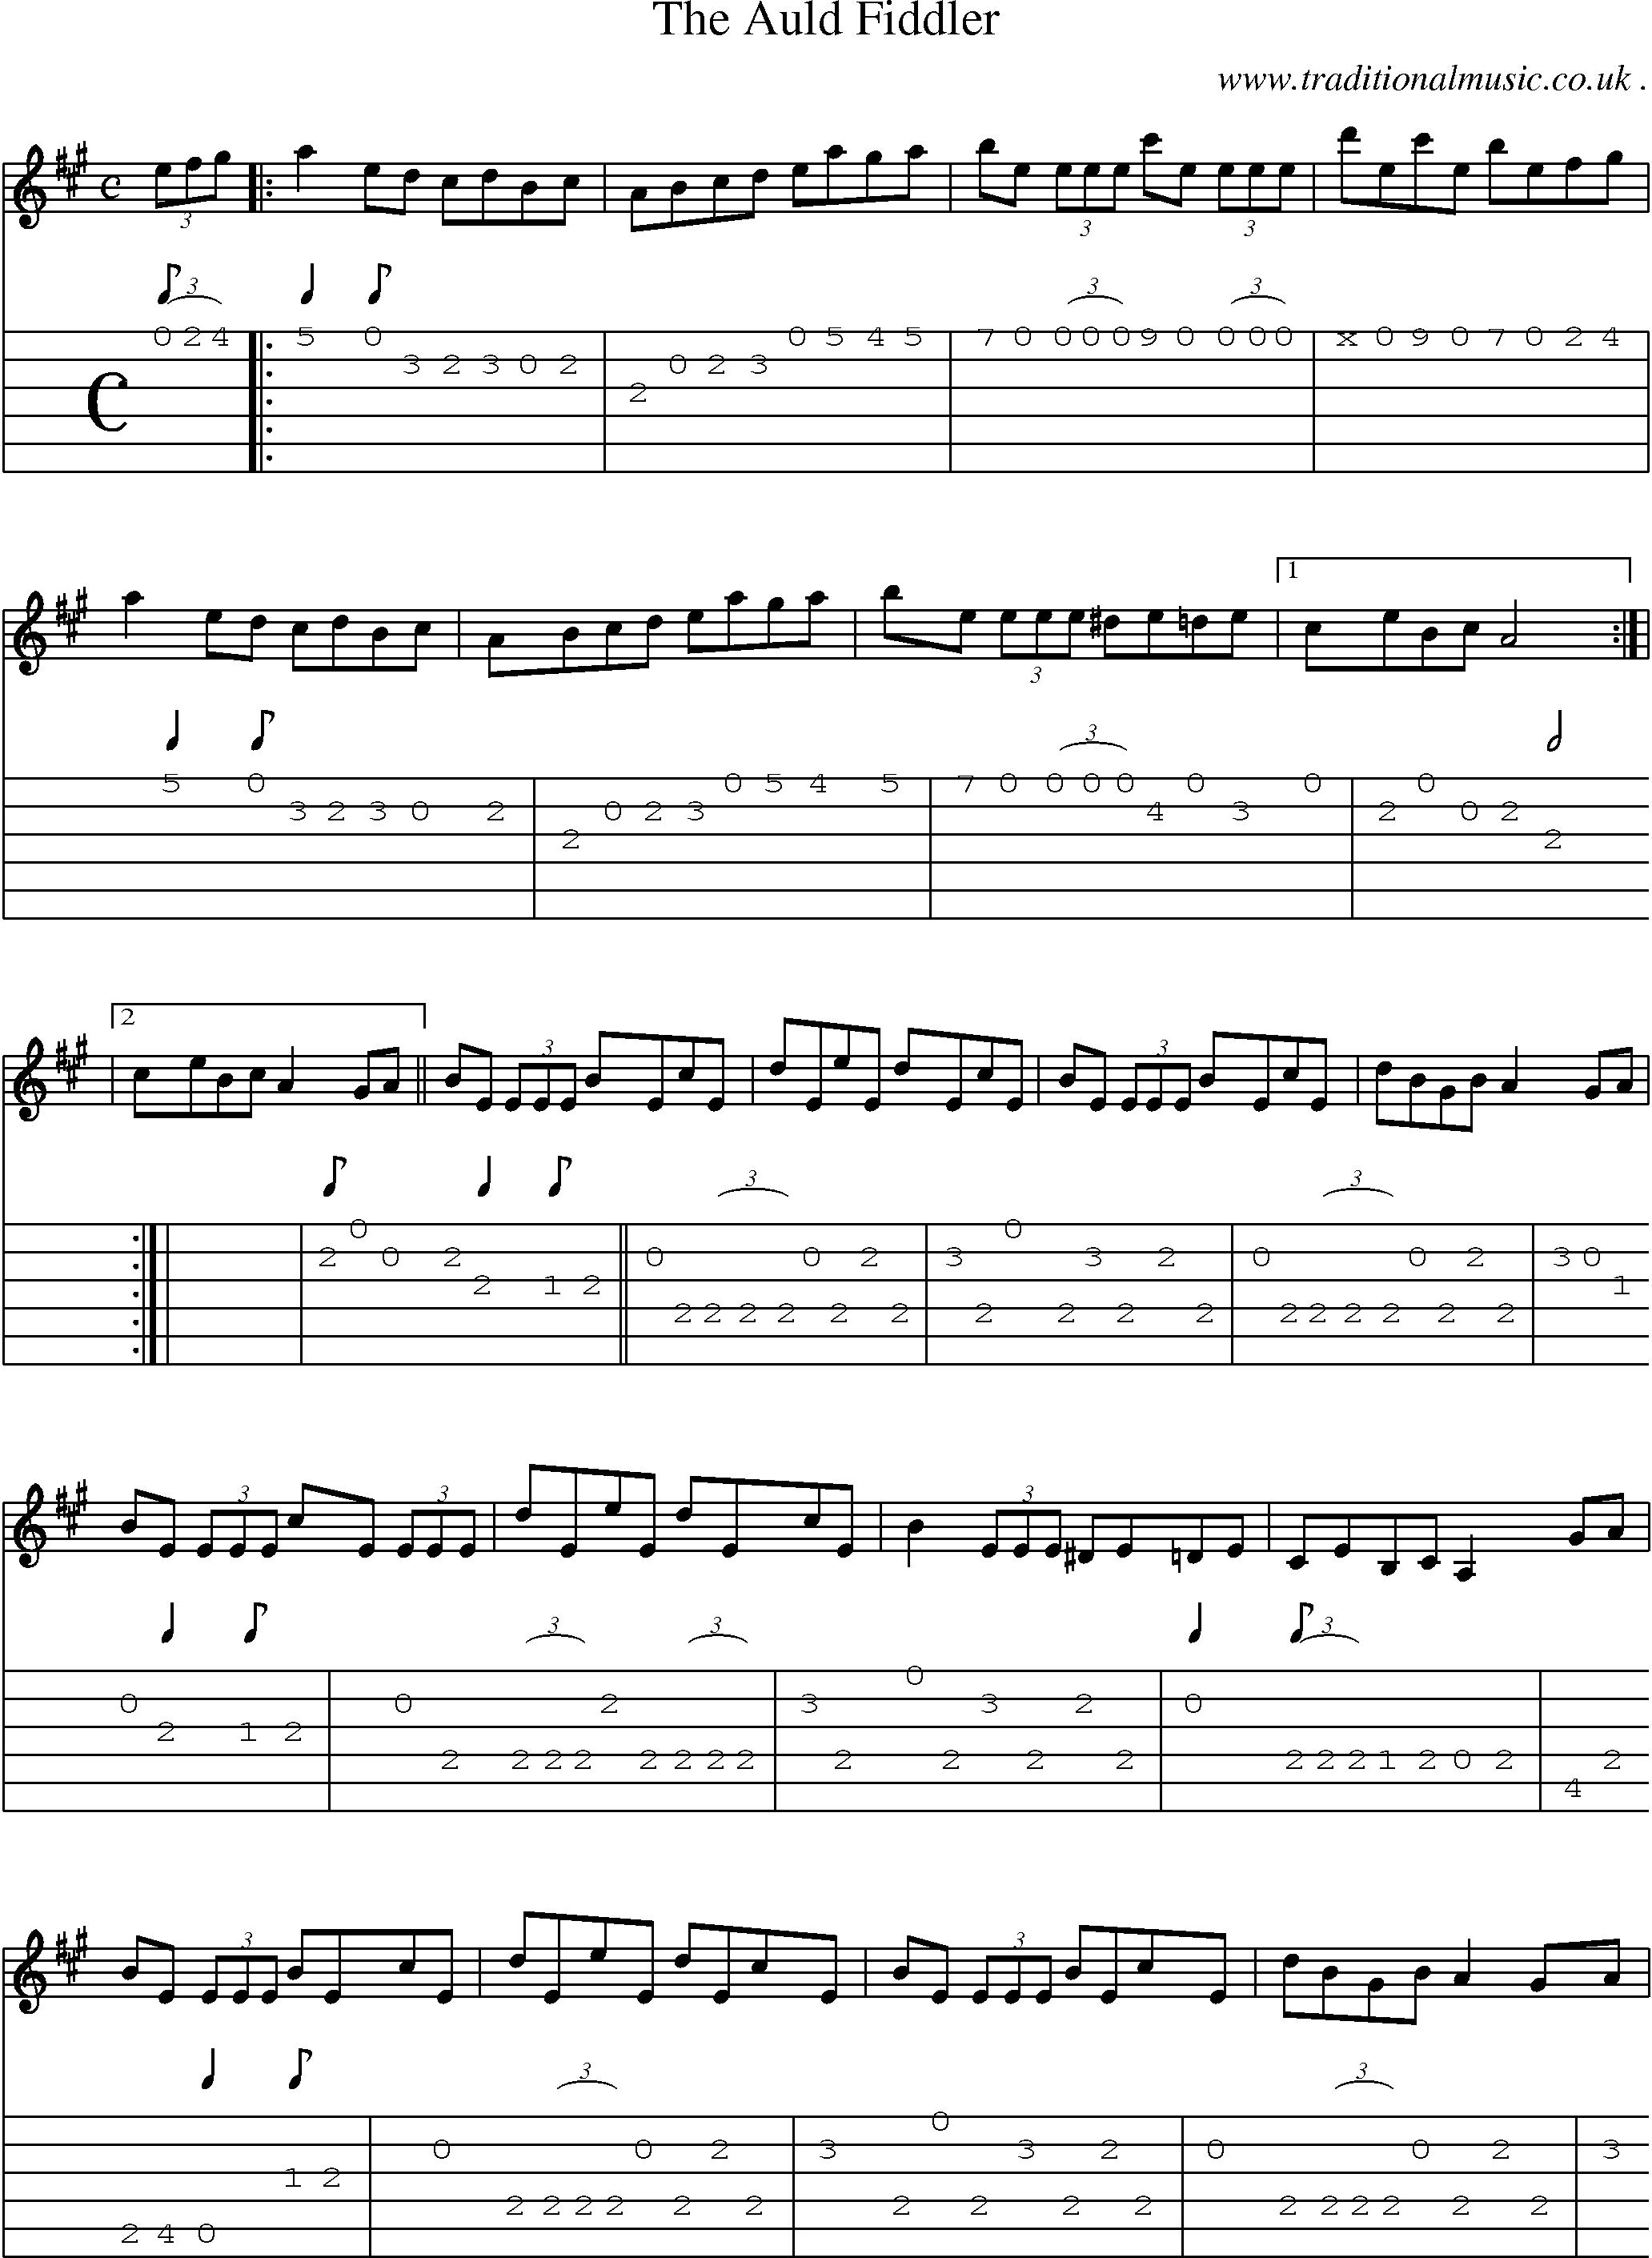 Sheet-music  score, Chords and Guitar Tabs for The Auld Fiddler